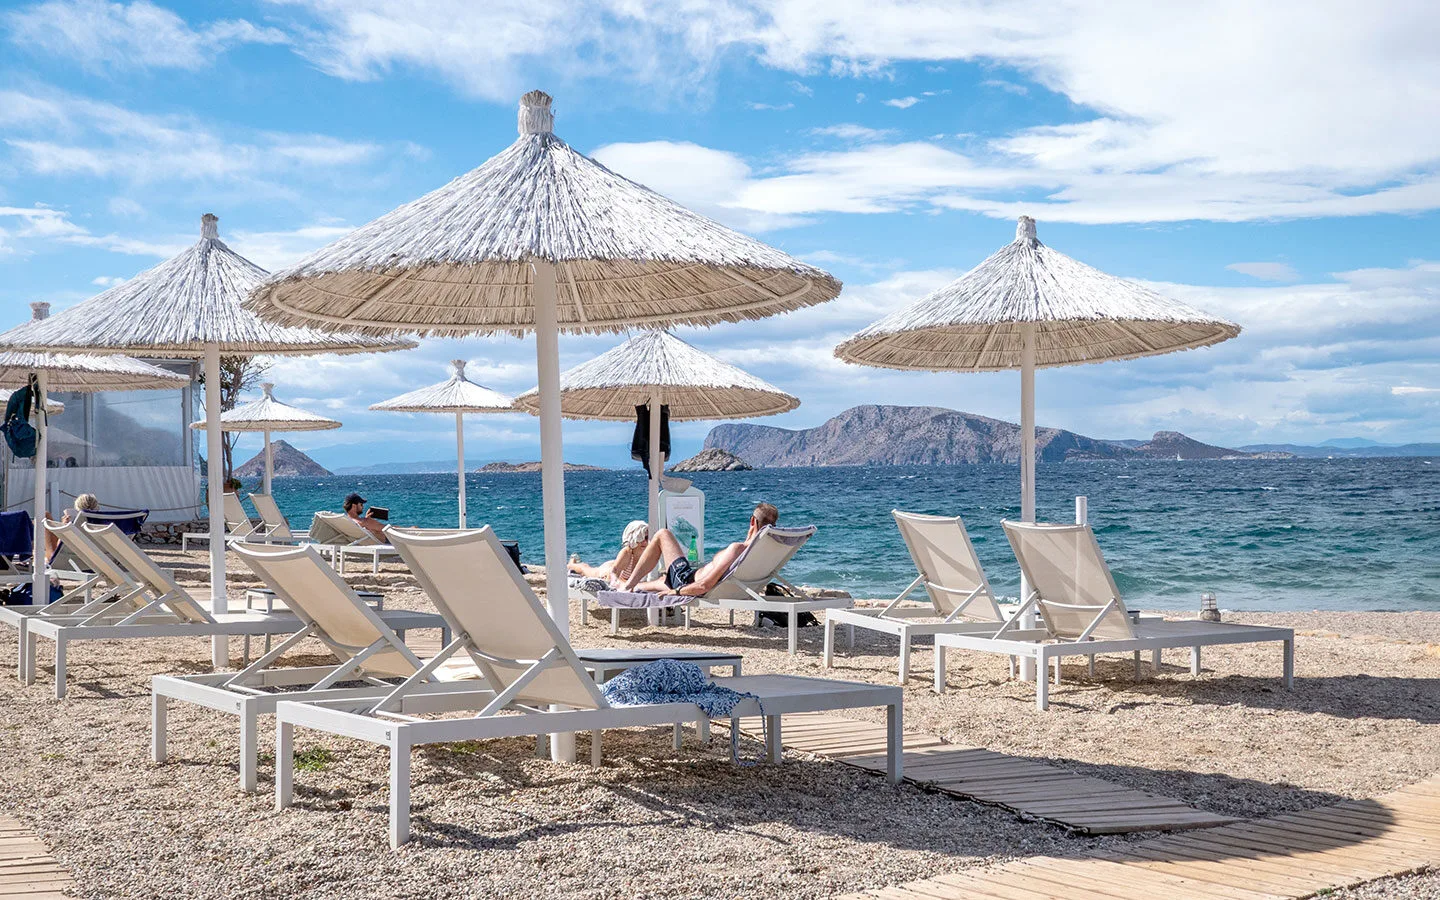 Best beaches in Hydra, Greece: The Four Seasons Hydra at Plakes Beach